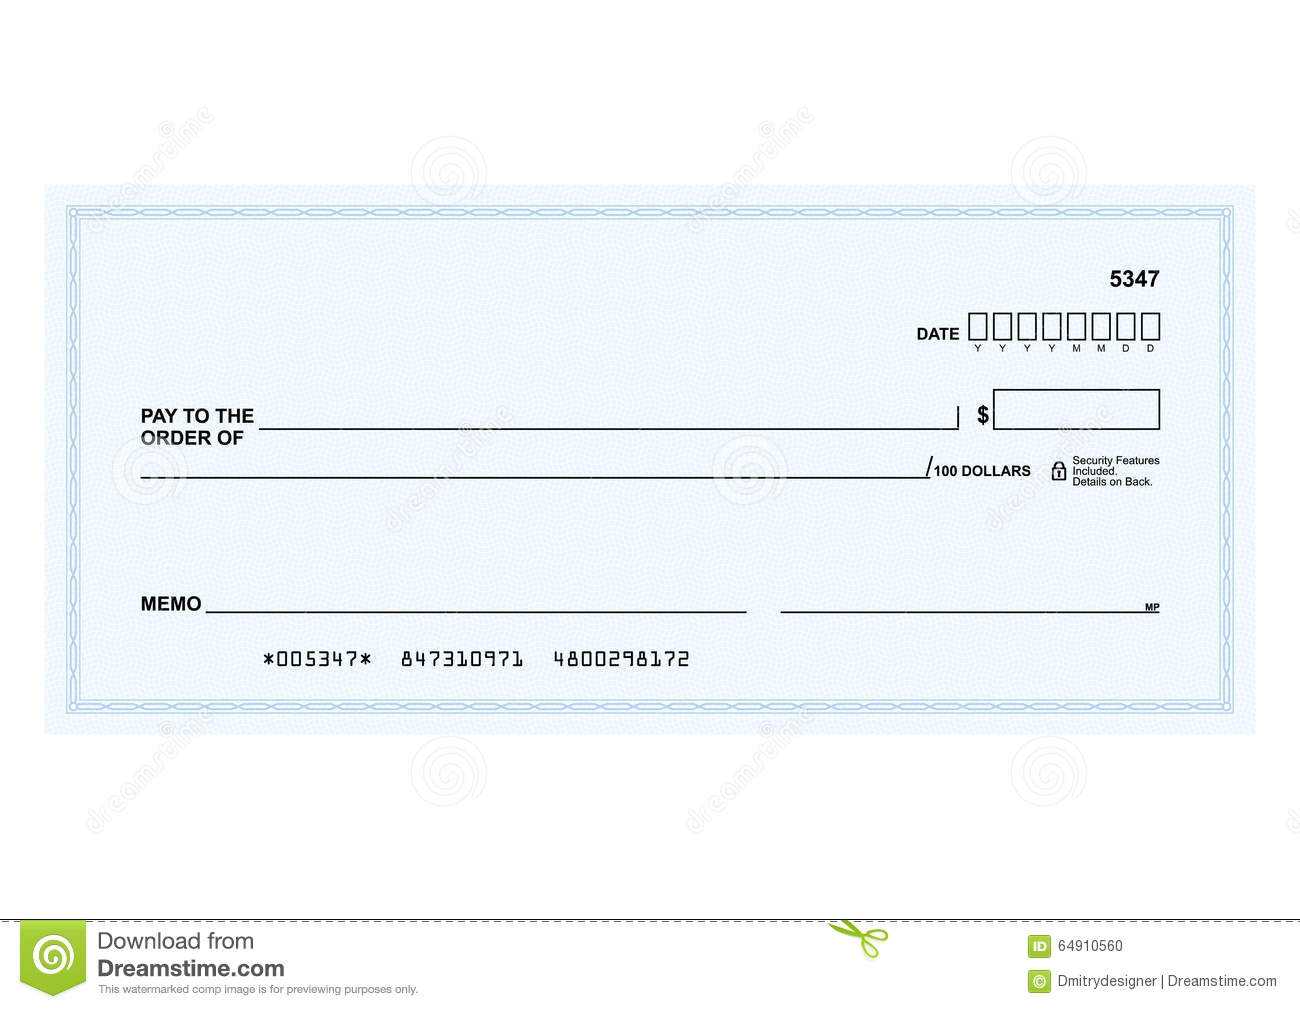 Blank Business Check Template. Business Reference Form Pnc Within Blank Business Check Template